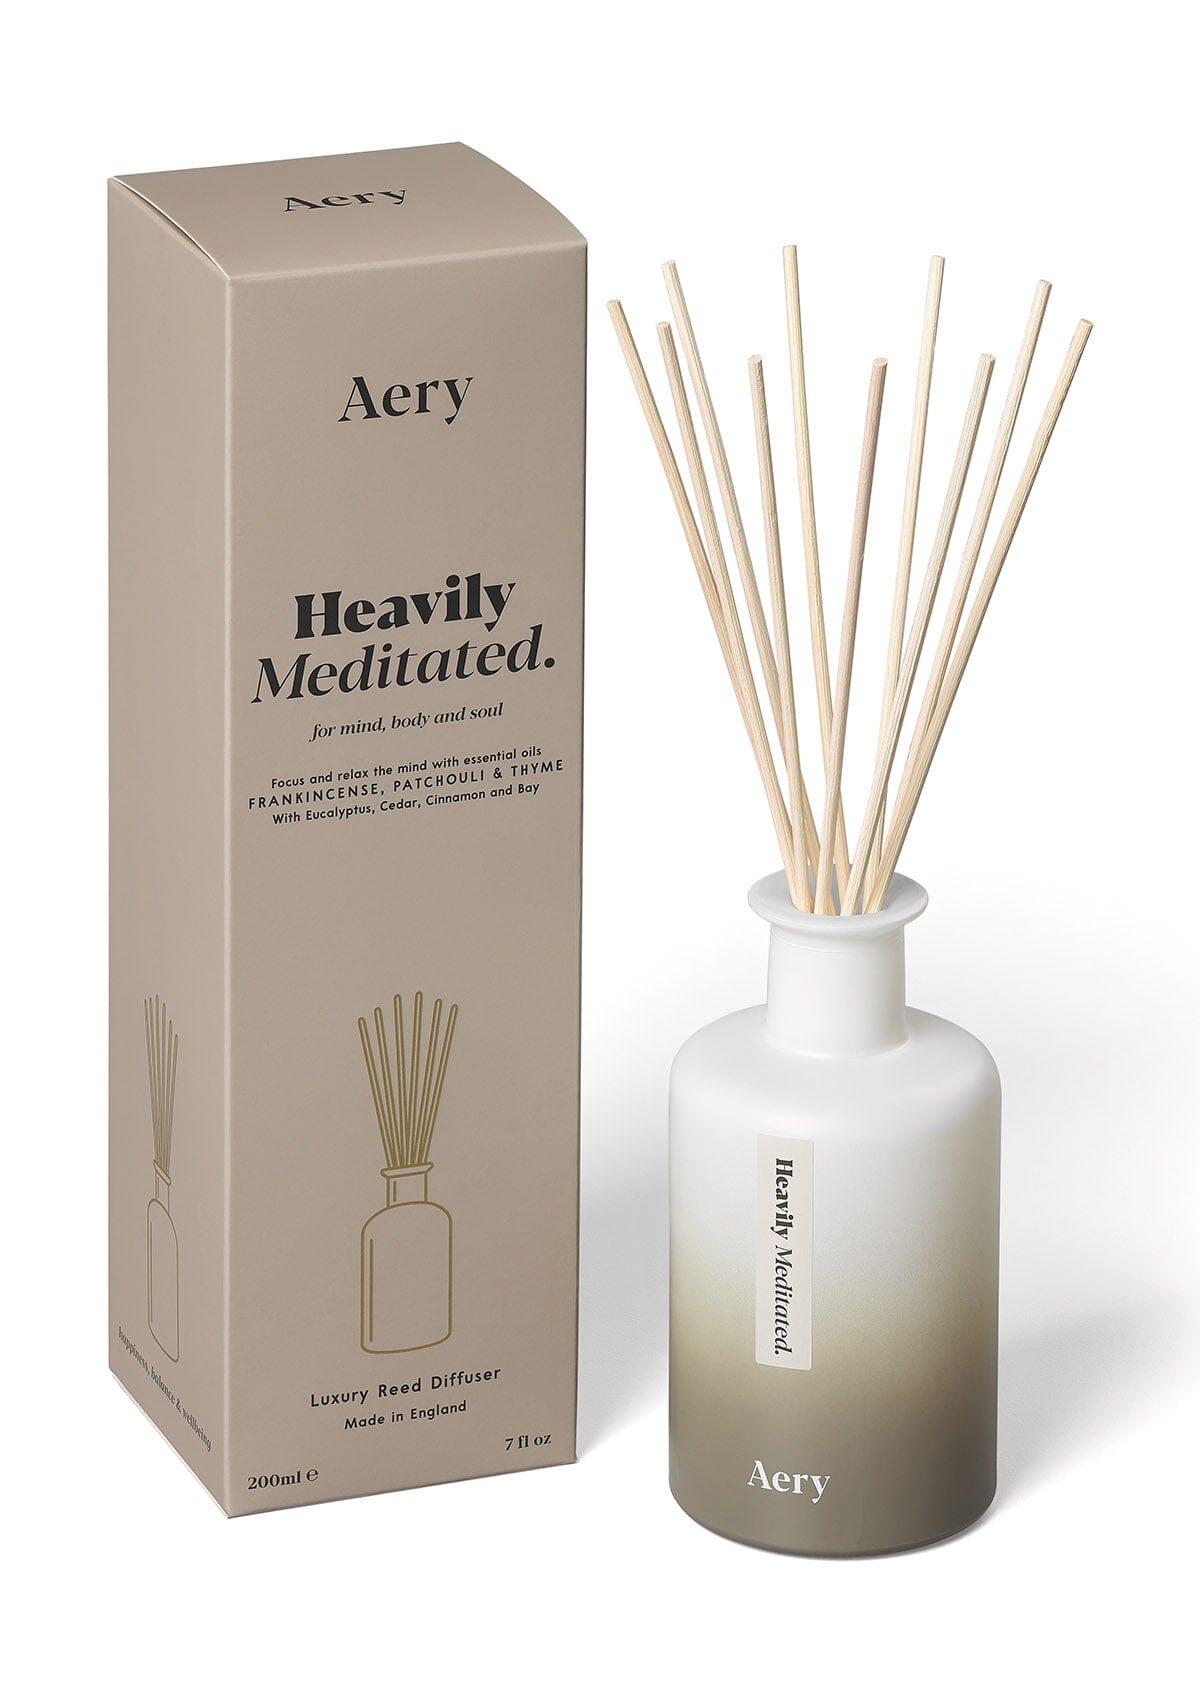 Heavily Meditated Diffuser with product packaging by Aery 